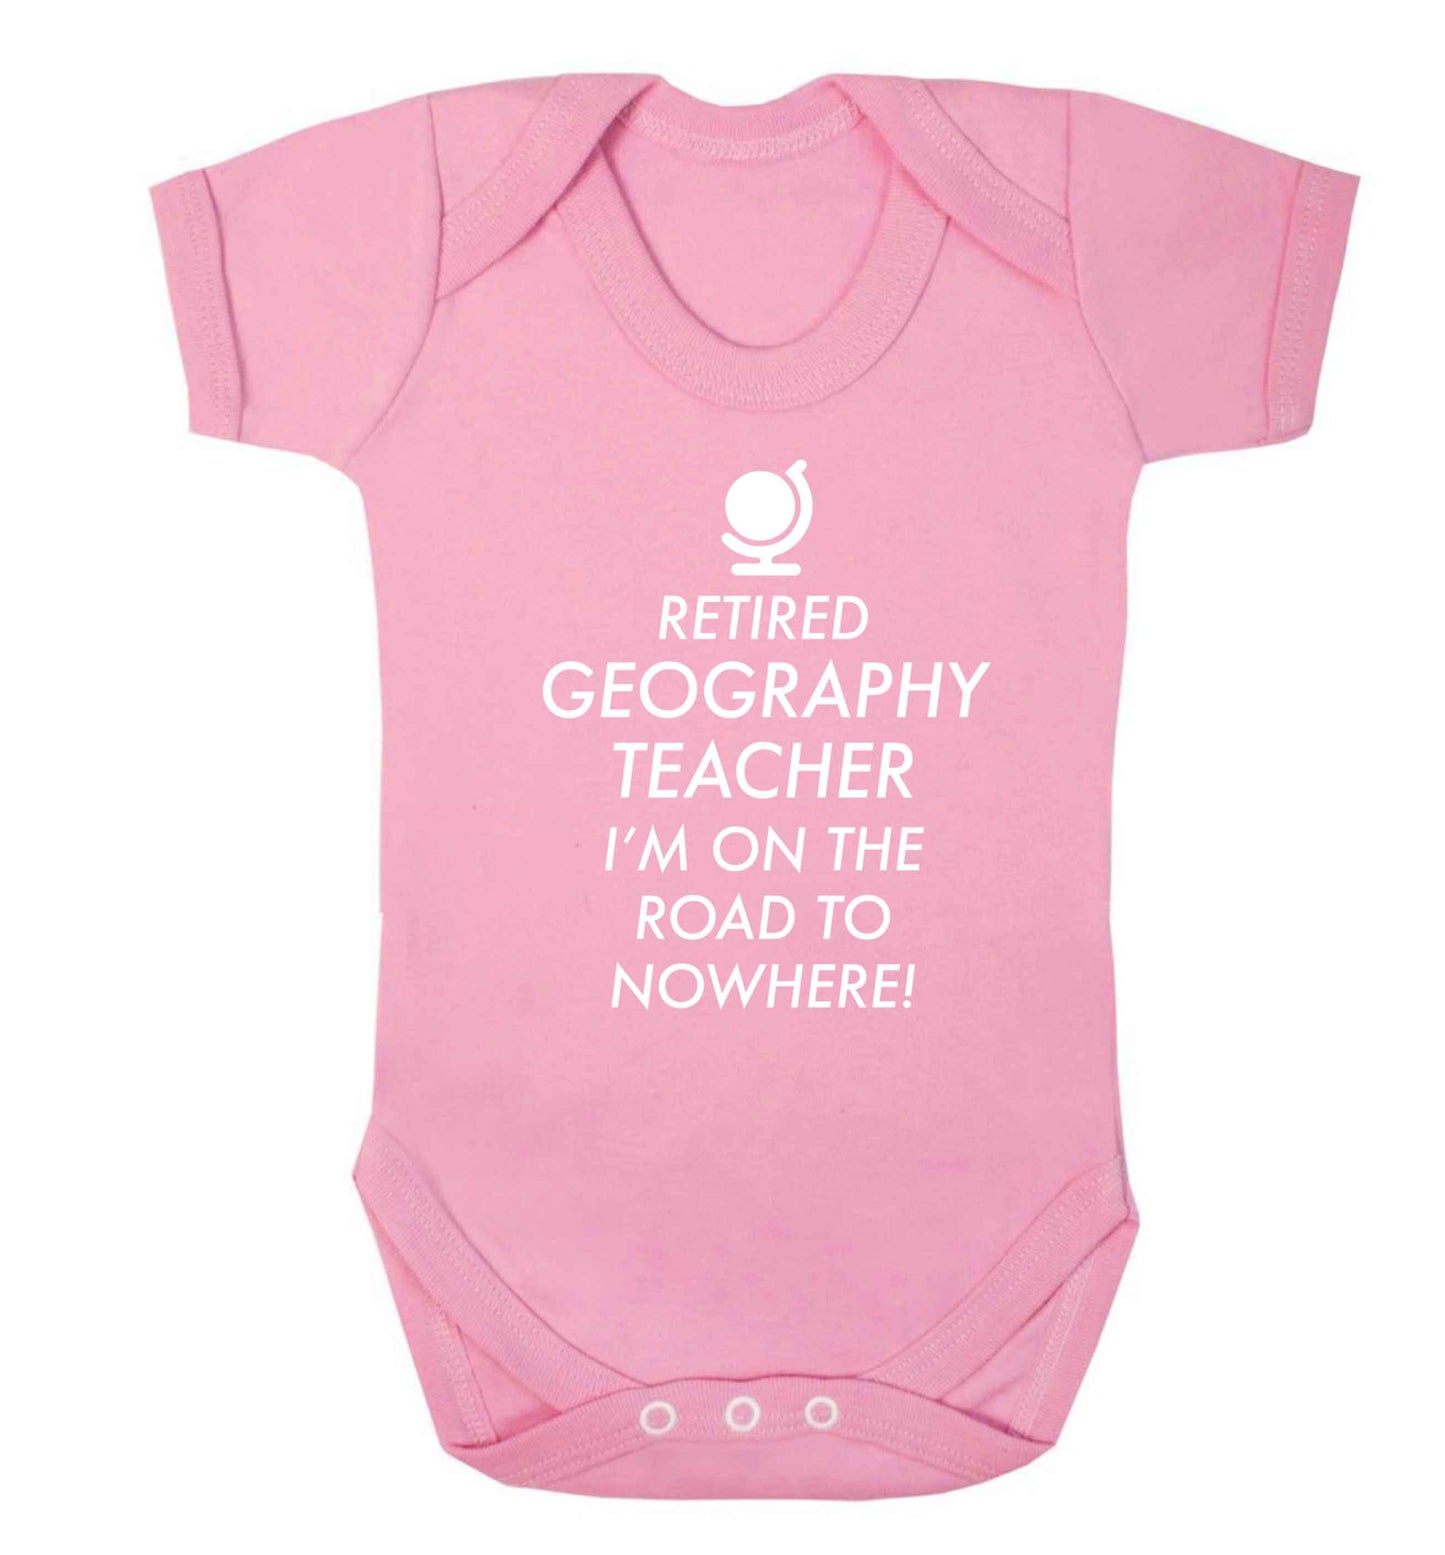 Retired geography teacher I'm on the road to nowhere Baby Vest pale pink 18-24 months